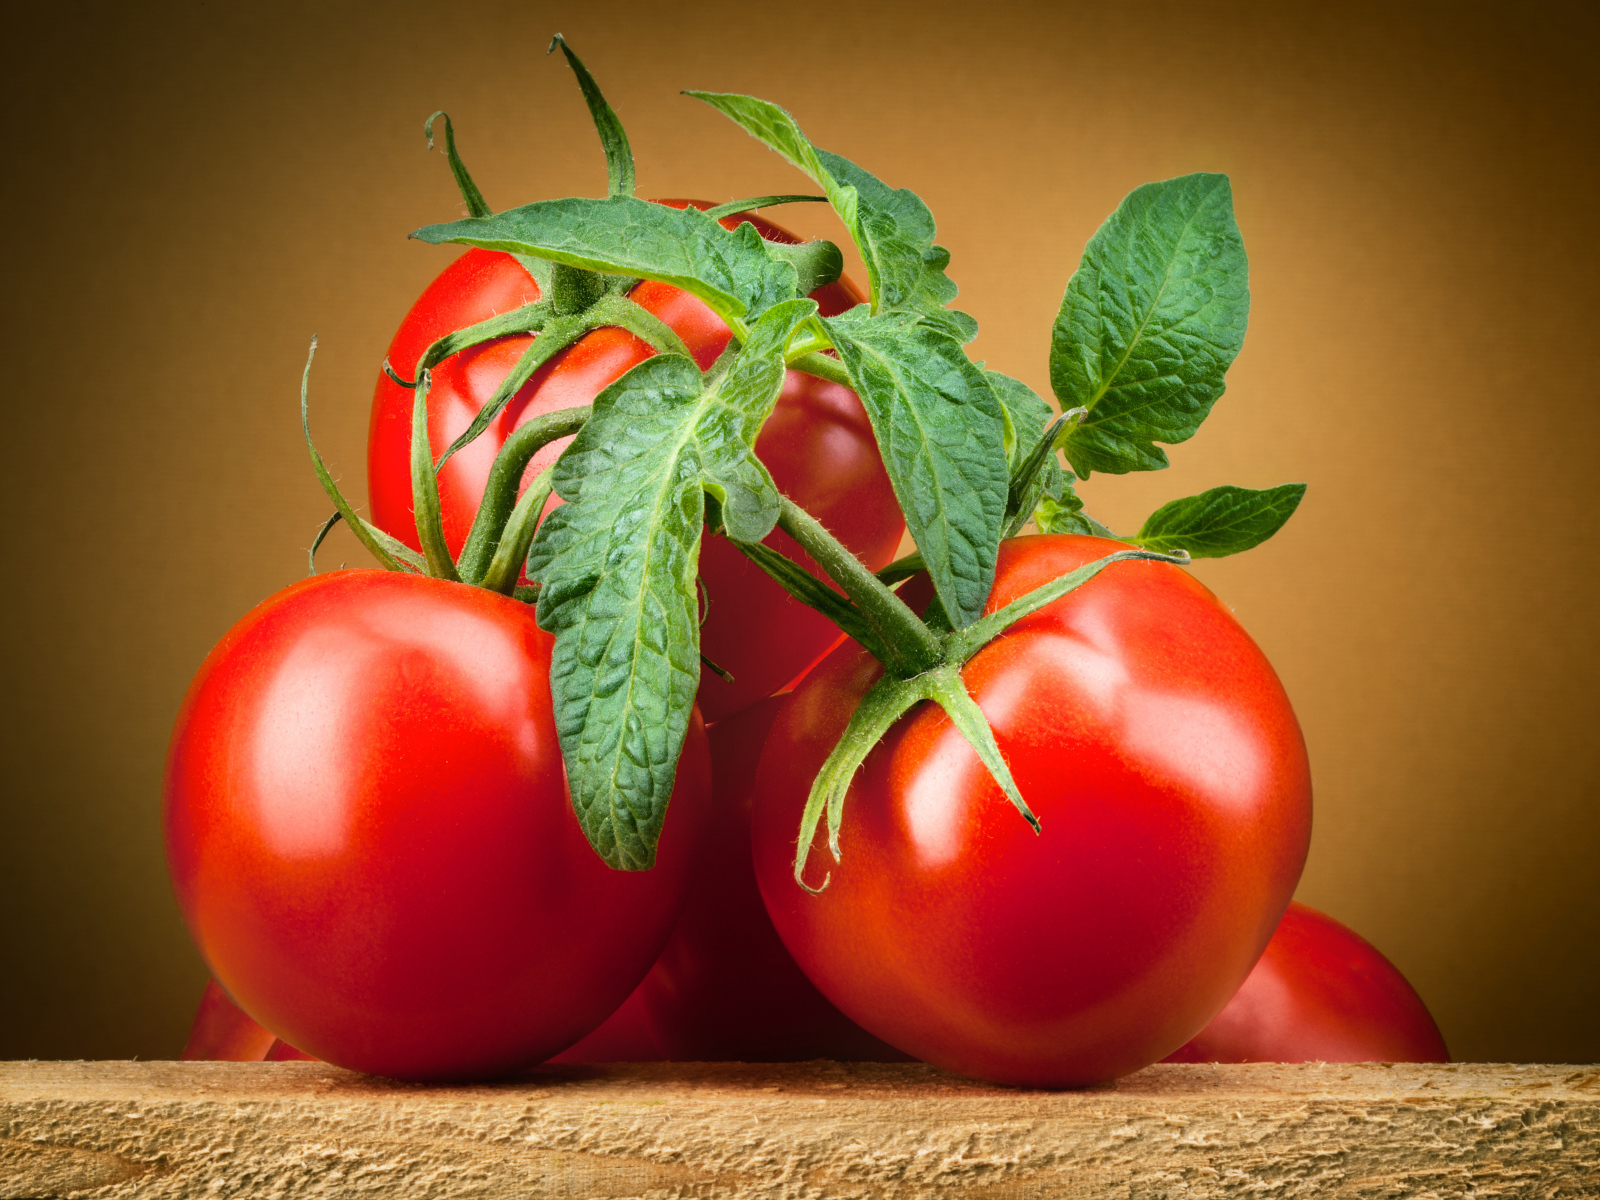 Large ripe red tomatoes with green leaves